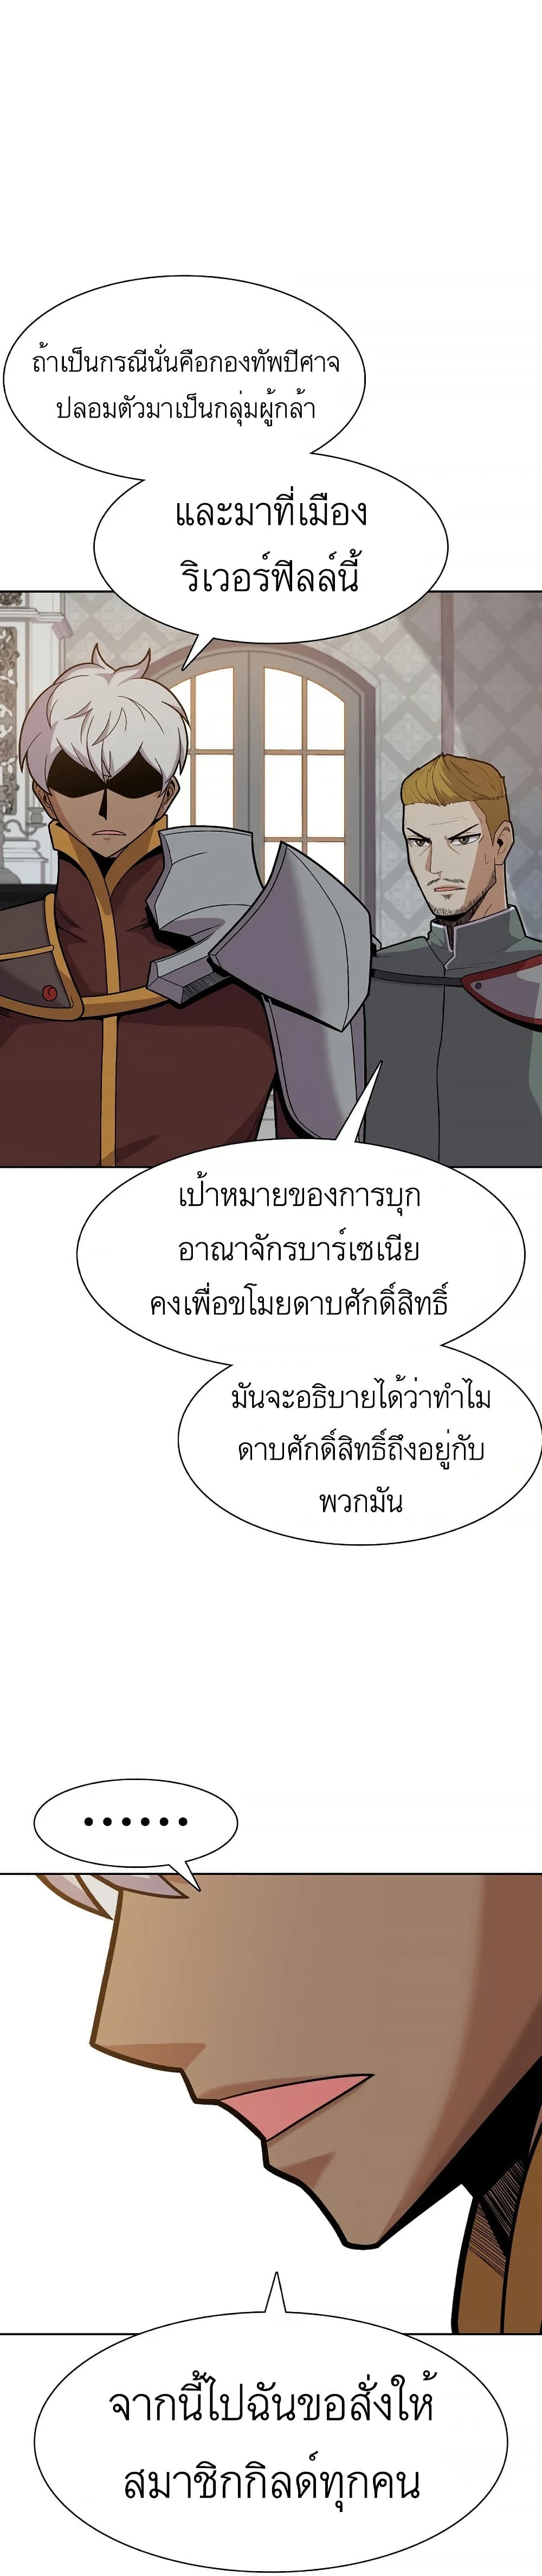 Raising Newbie Heroes In Another World ตอนที่ 14 (6)